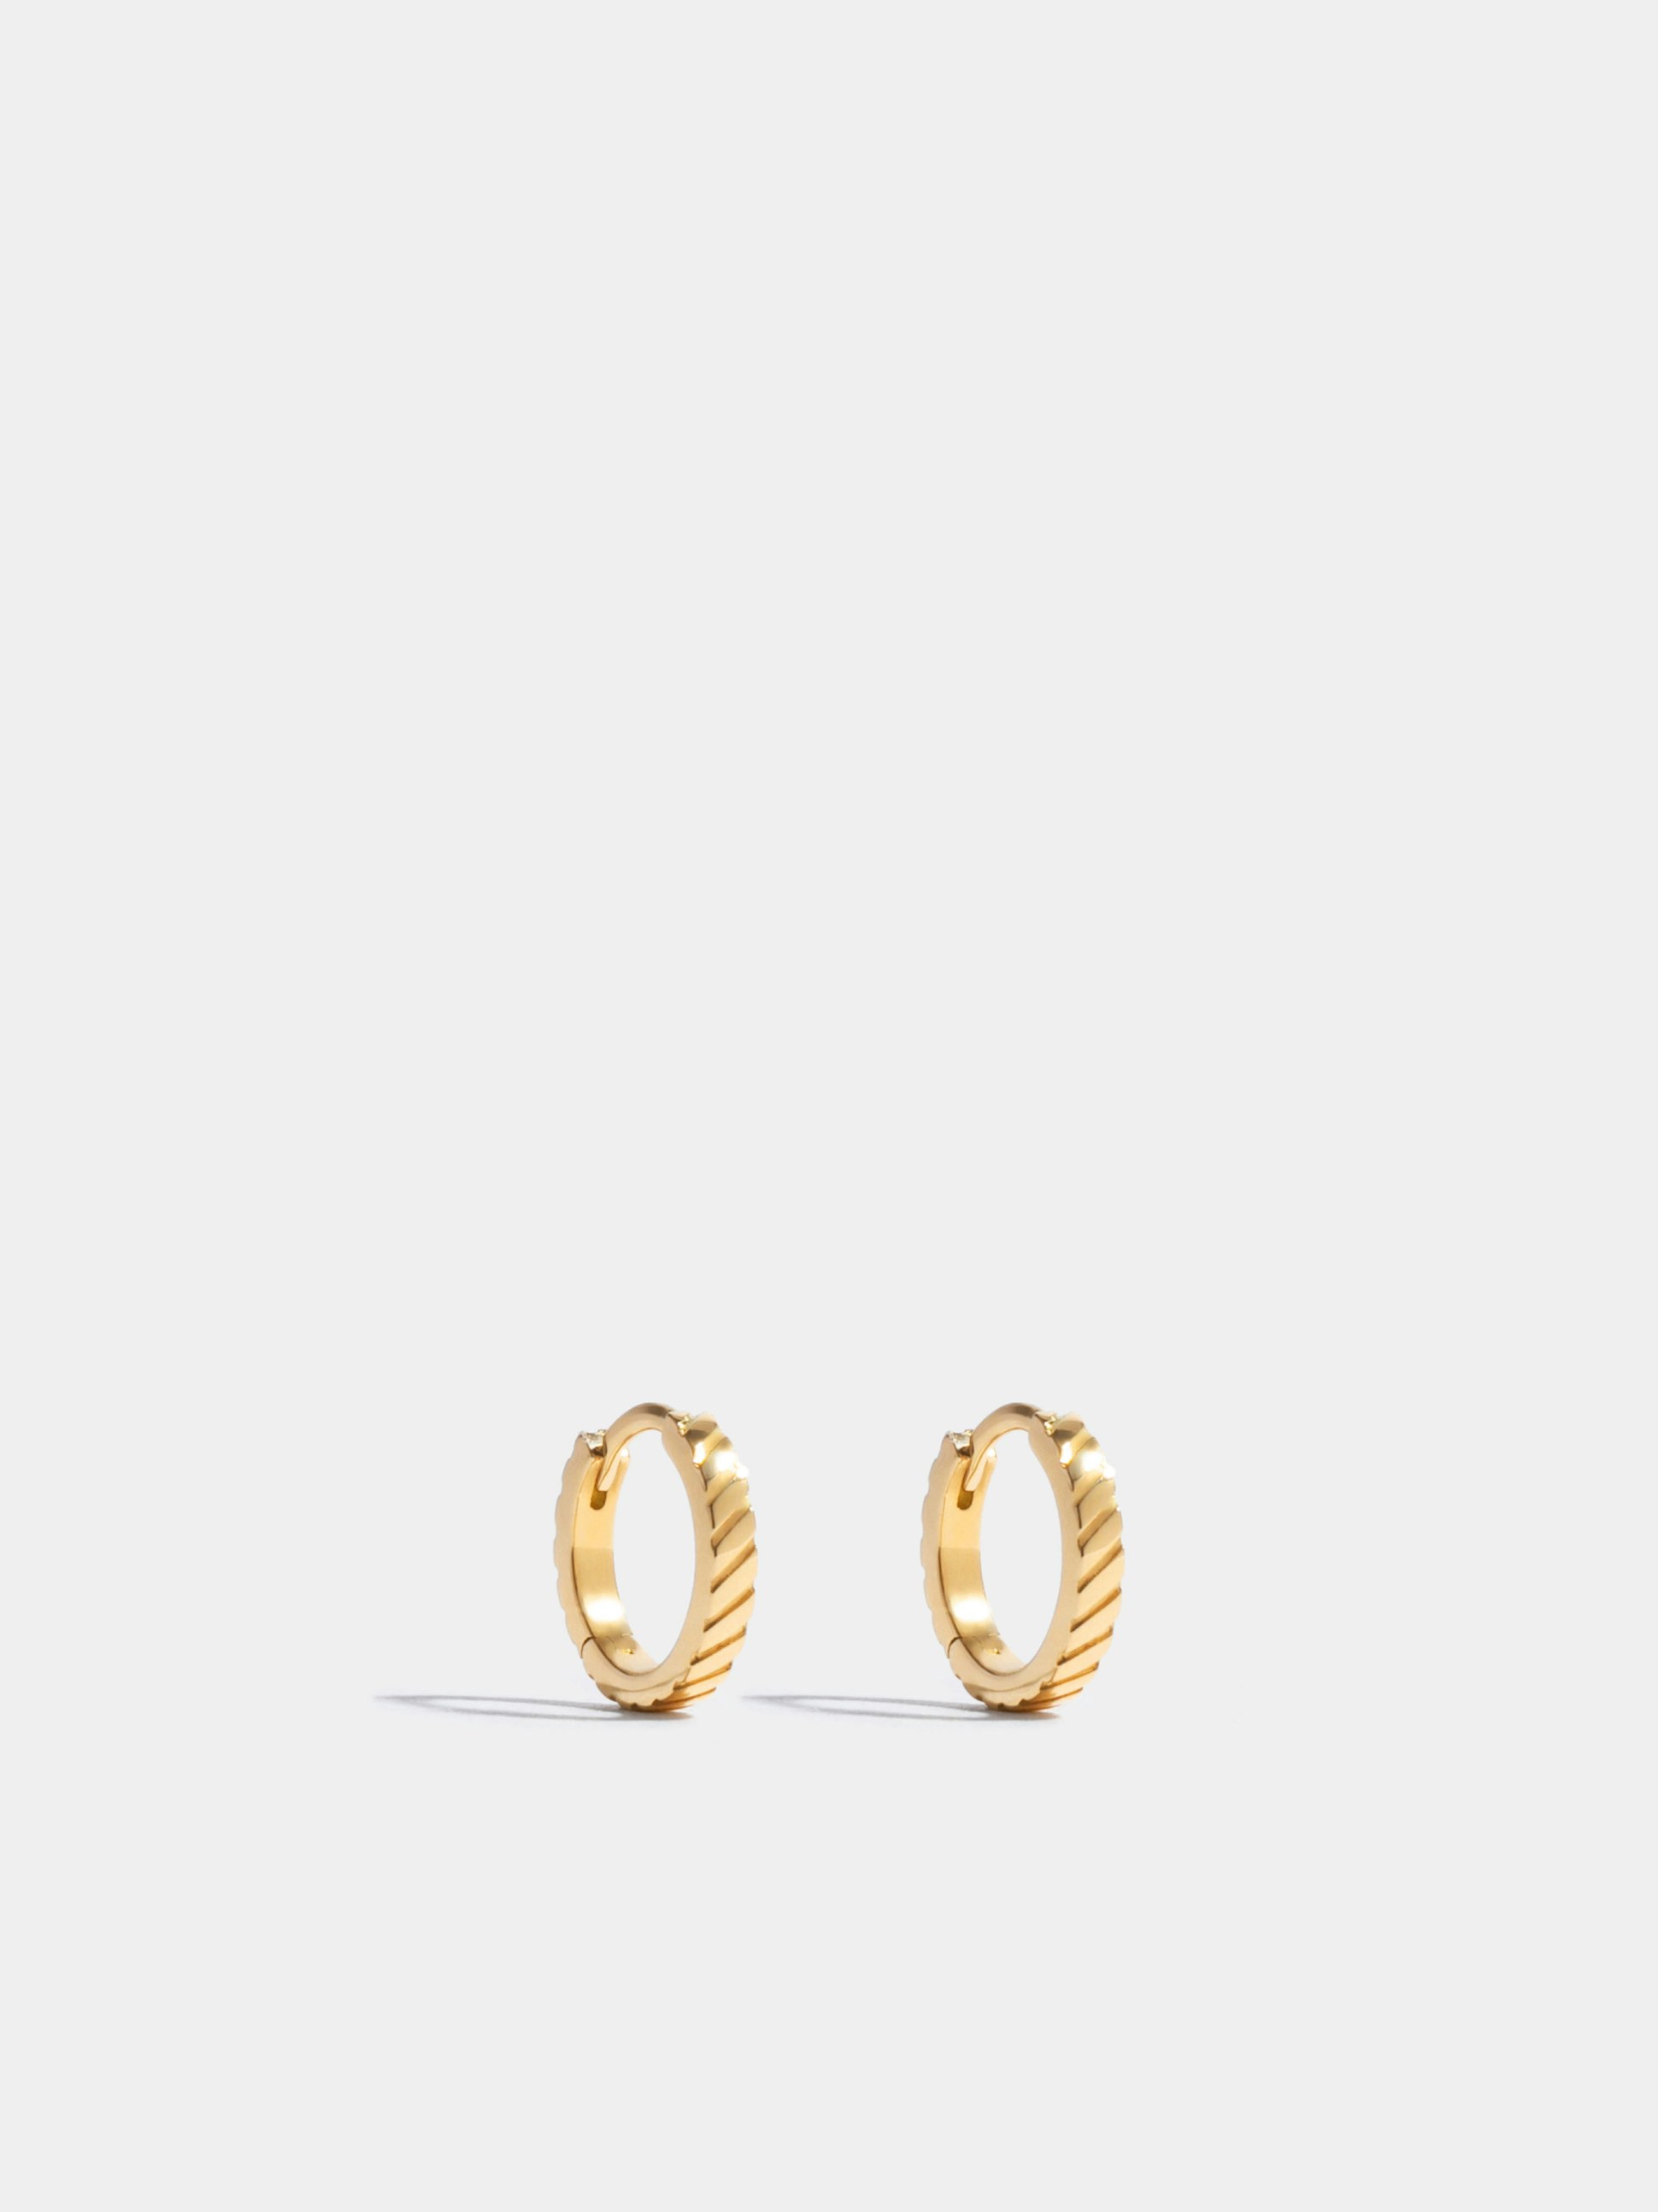 Anagramme grooved earrings in yellow gold 18k Fairmined ethical